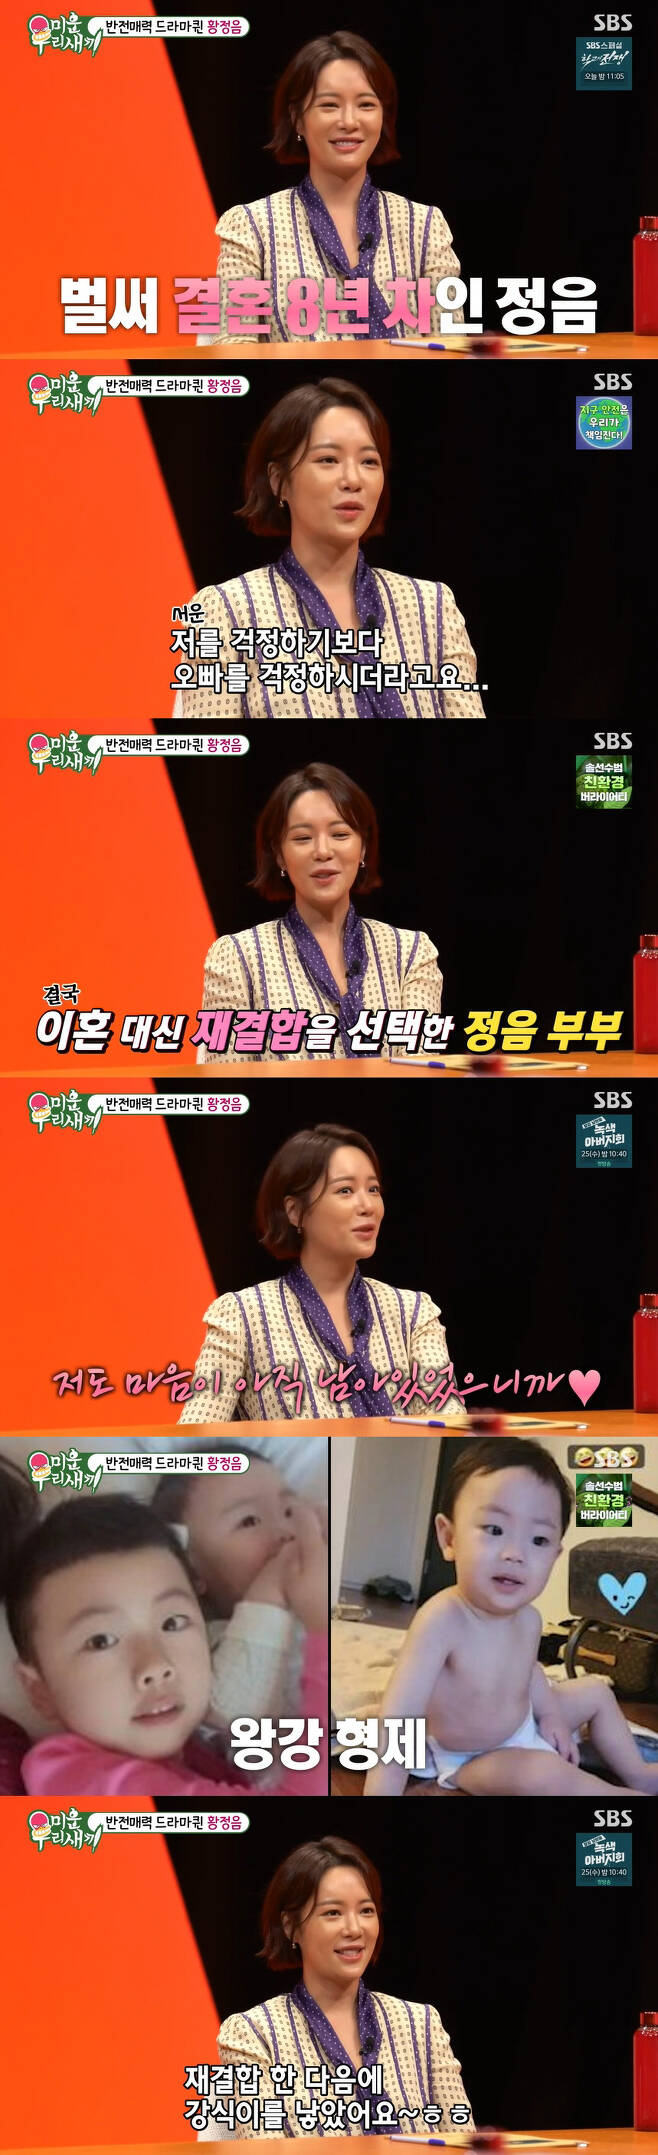 Actor Hwang Jung-eum revealed why he was reunited with Husband during the divorce adjustment.Hwang Jung-eum appeared as a special MC on SBS My Little Old Boy broadcast on the 22nd.On the day, Hwang Jung-eum said, I was married to professional golfer and businessman Lee Young-don in 10 months of love, he said. At that time, the pods seemed to be perfect from head to toe.Hwang Jung-eum, who has been married for eight years in 2016, has never seen Husband look good and has never had a heartbreaking moment.Even the biggest regret in life was marriage, which surprised me.Movengers said, I liked it all at the time of my honeymoon, but now that I have lived for eight years, I do not have it anymore. Hwang Jung-eum said, It seems like life is like living.Isnt it kind of amazing that theres nothing (that I like)? she said, laughing.On the other hand, Hwang Jung-eum, who reported on the divorce adjustment in 2020, was surprised to confess that he talked to his parents the day before the divorce article.Regarding the reaction of the family members, he said, I told my family that there will be a divorce article in the group chat room, so dont be surprised, and what was so shocking was that my father said, Im more worried about this West, and he was worried about Husband, not me.Hwang Jung-eum, who overcame the crisis in a year and chose to reunite instead of divorce, said, But Husband is careful of the behavior I hated in the past, and I still feel like I have a heart.Hwang Jung-eum, a mother of two children, smiled as soon as the story about her son came out, saying, It is so beautiful. Then, photos of her two sons were released, and Shin Dong-yeop admired, It is hard to look like that since childhood.Hwang Jung-eum said that the names of the two sons were Wang-sik, a steel type, and that they rejoined and then gave birth to a steel type, while Seo Jang-hoon said, Its a rare name these days.Who built it? Hwang Jung-eum replied, Husband thinks that he does not want to build it like a name these days.On the day of the broadcast, a childhood photo of Hwang Jung-eum, a mother-in-law who was famous in the neighborhood because she was pretty from birth, was released.The Movengers praised it as pretty, and Hwang Jung-eum nodded, saying, I did not have the real thing.Hwang Jung-eum, who gives birth to a daughter, said, Its the biggest problem of my life. Ive been working hard, so Im really worried about whether I should start now as an actress or go back and give birth to a daughter.Seo Jang-hoon, who heard that Hwang Jung-eums two sons names were Wang-sik and steel type, asked, What is your daughters name wang shunyi?Hwang Jung-eum said, My nickname is wang shunyi. When I was in a relationship, my nickname was Hwang Wang-soon. So when I had a daughter, I wanted to use wang shunyi. So my mother asked me, Is this a frog family?Hwang Jung-eum, who was called a doll by Husband before the marriage, said, At that time, I thought it was called a doll because it was pretty. But after marriage, it was called Satans doll.